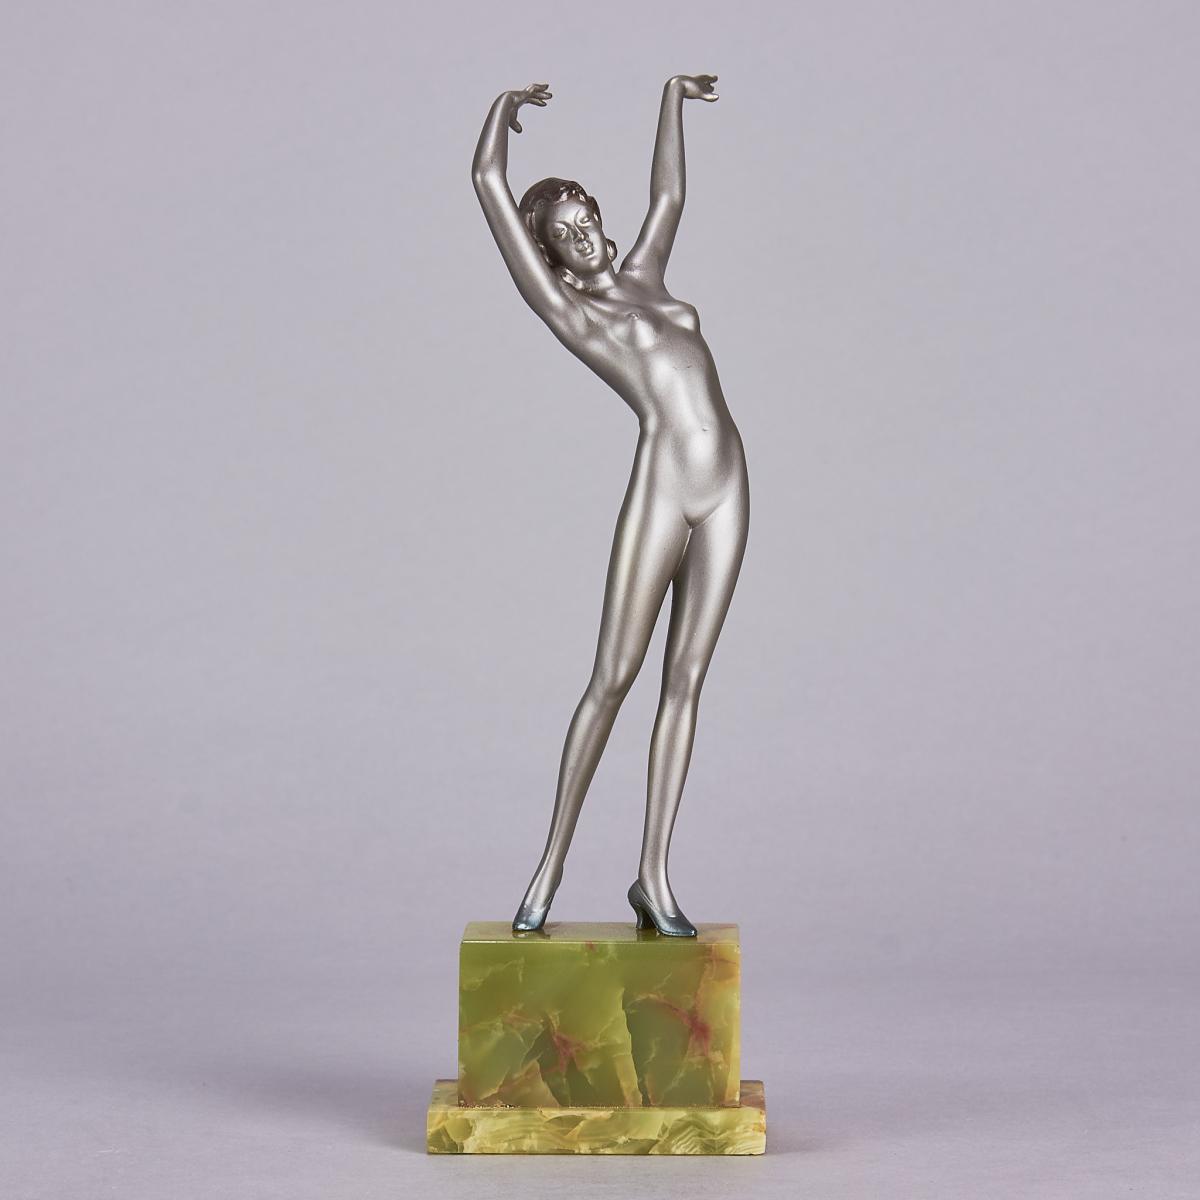 Early 20th Century Cold-Painted Austrian Bronze entitled "Stretched Dancer" by Josef Lorenzl